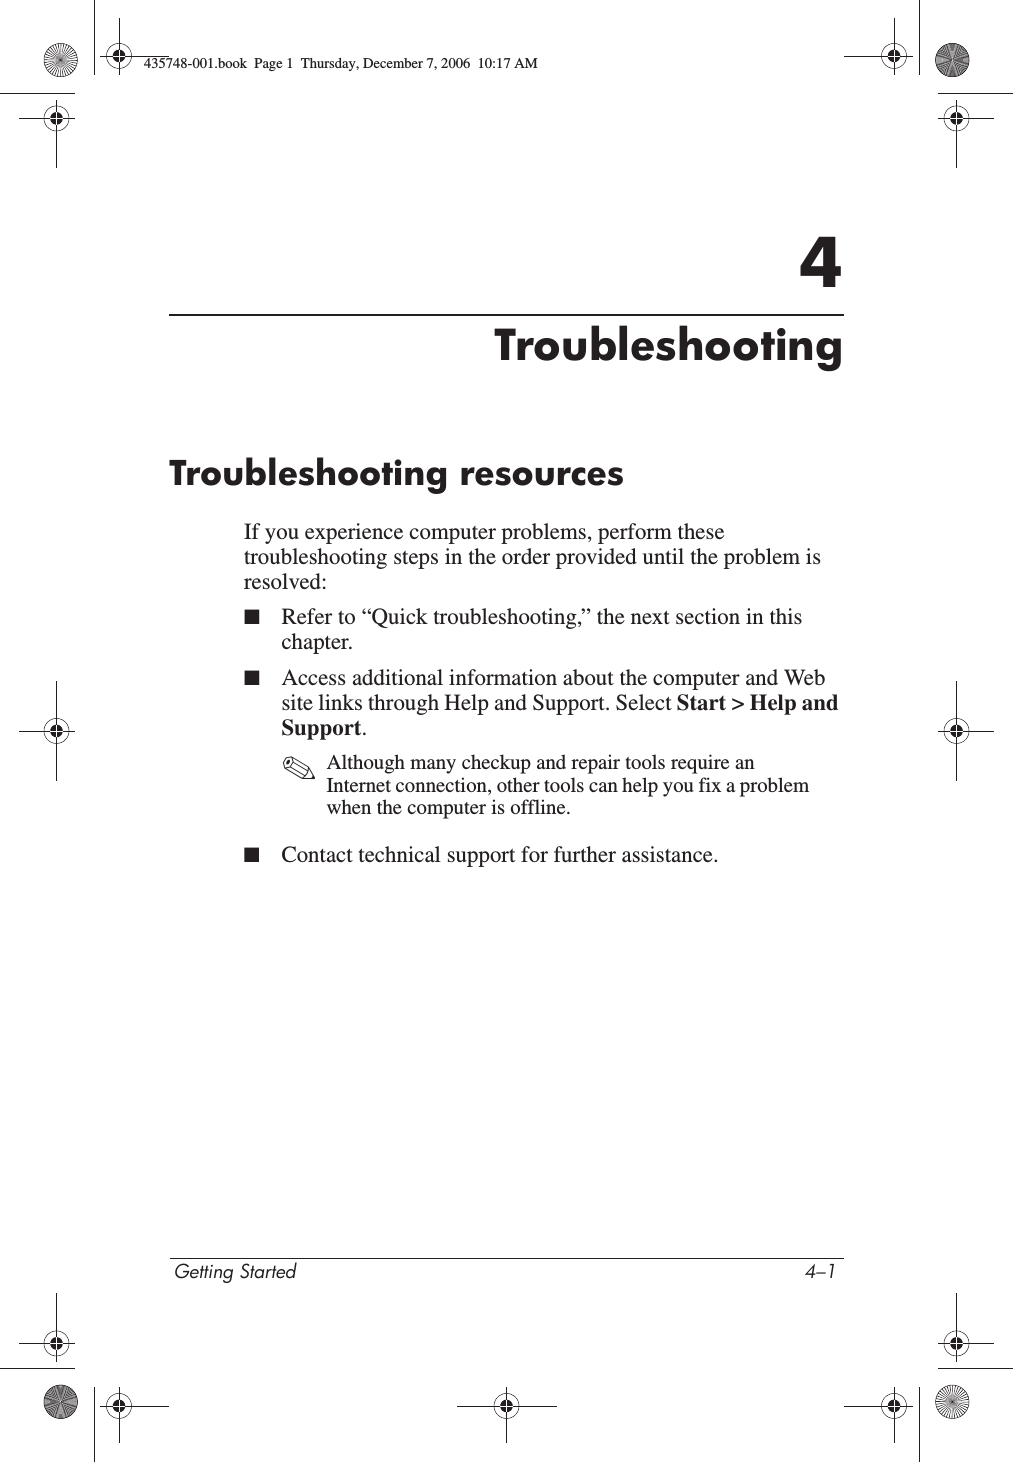 Getting Started 4–14TroubleshootingTroubleshooting resourcesIf you experience computer problems, perform these troubleshooting steps in the order provided until the problem is resolved:■Refer to “Quick troubleshooting,” the next section in this chapter.■Access additional information about the computer and Web site links through Help and Support. Select Start &gt; Help and Support.✎Although many checkup and repair tools require an Internet connection, other tools can help you fix a problem when the computer is offline.■Contact technical support for further assistance.435748-001.book  Page 1  Thursday, December 7, 2006  10:17 AM